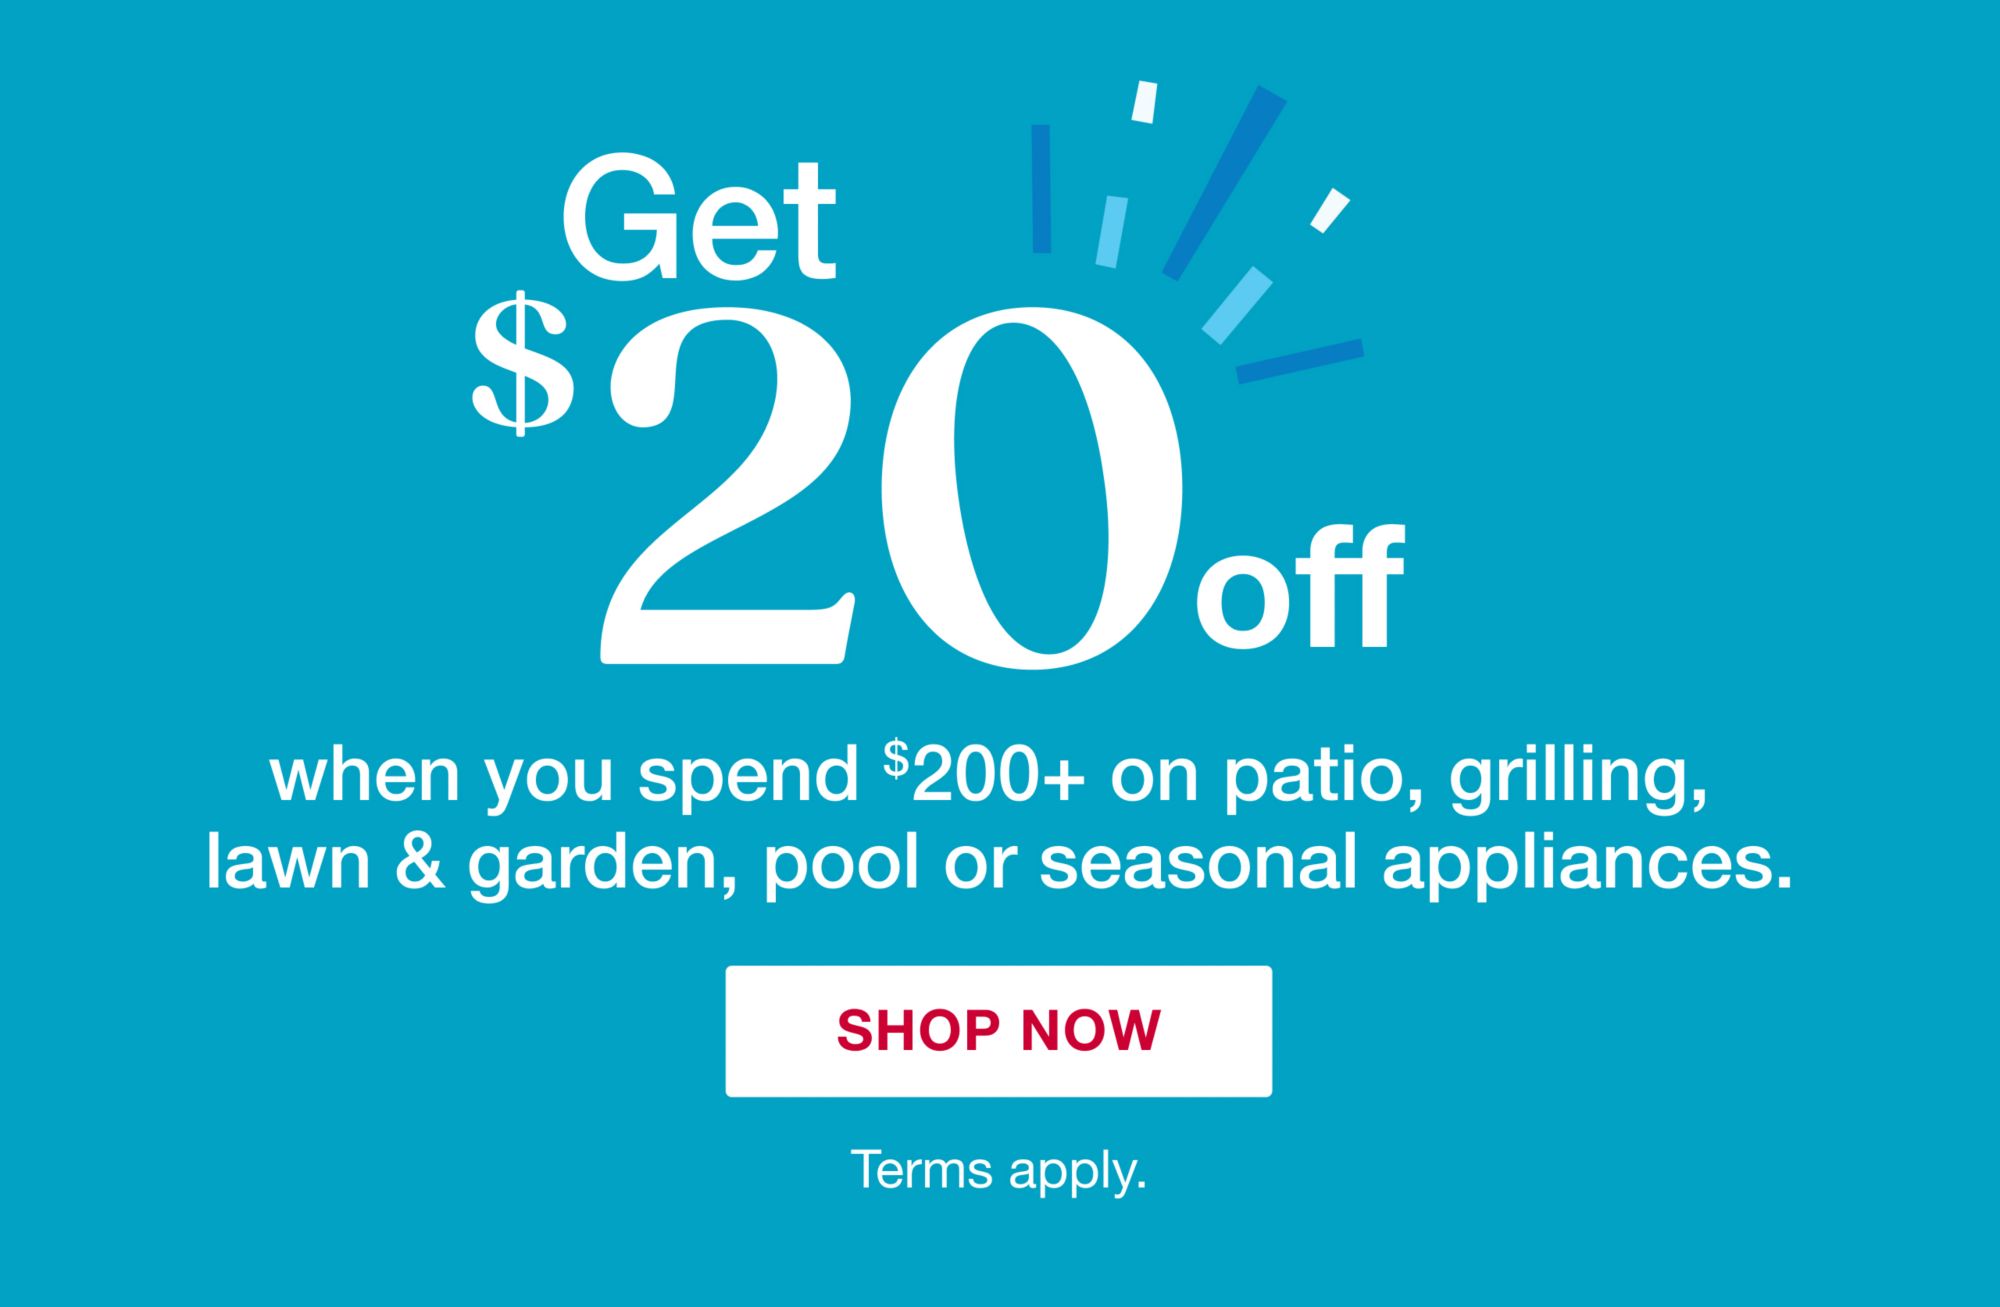 Get $20 off when you spend $200 on patio, grilling, lawn and garden, pool or seasonal appliances. Click to shop now